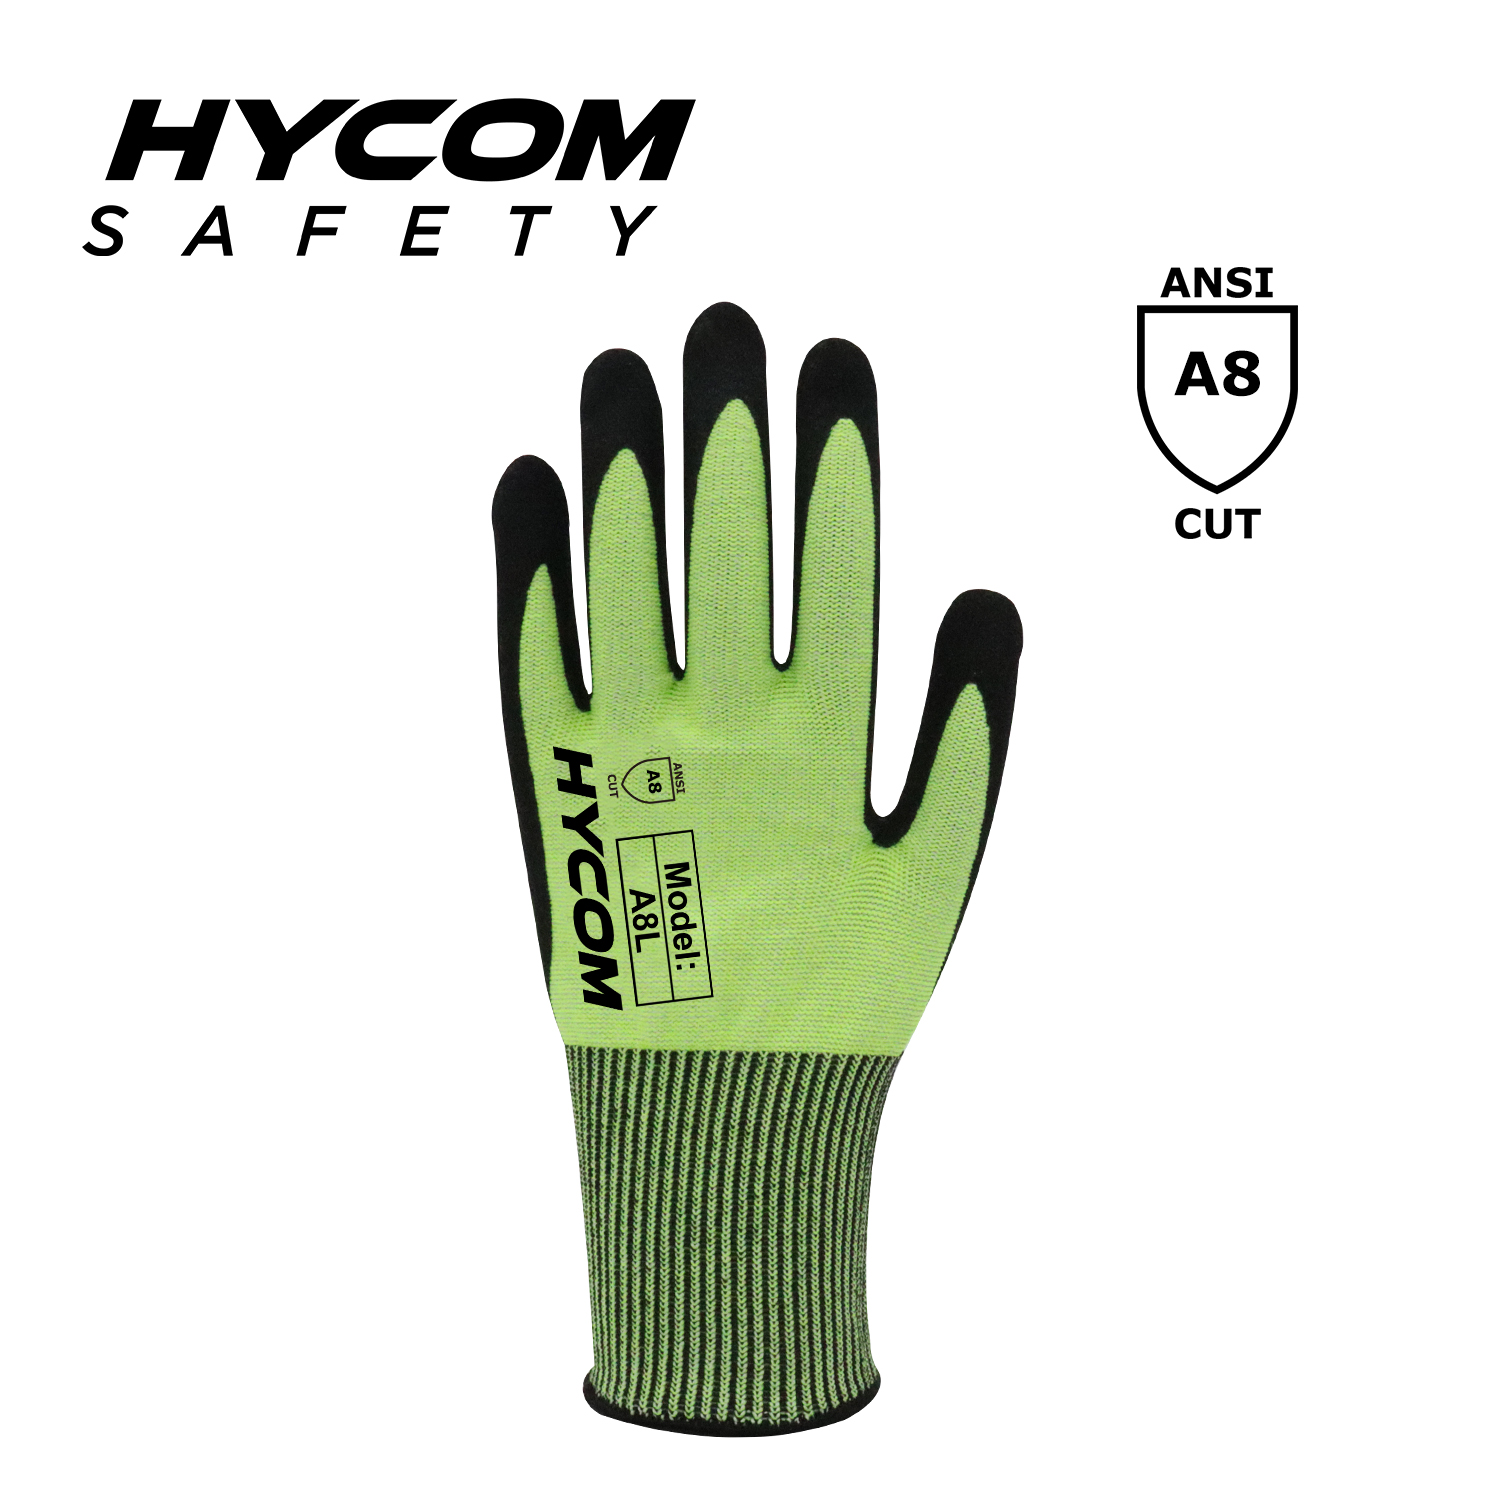 HYCOM 13G ANSI 8 Cut Resistant Glove with Palm Nitrile Coating PPE Gloves